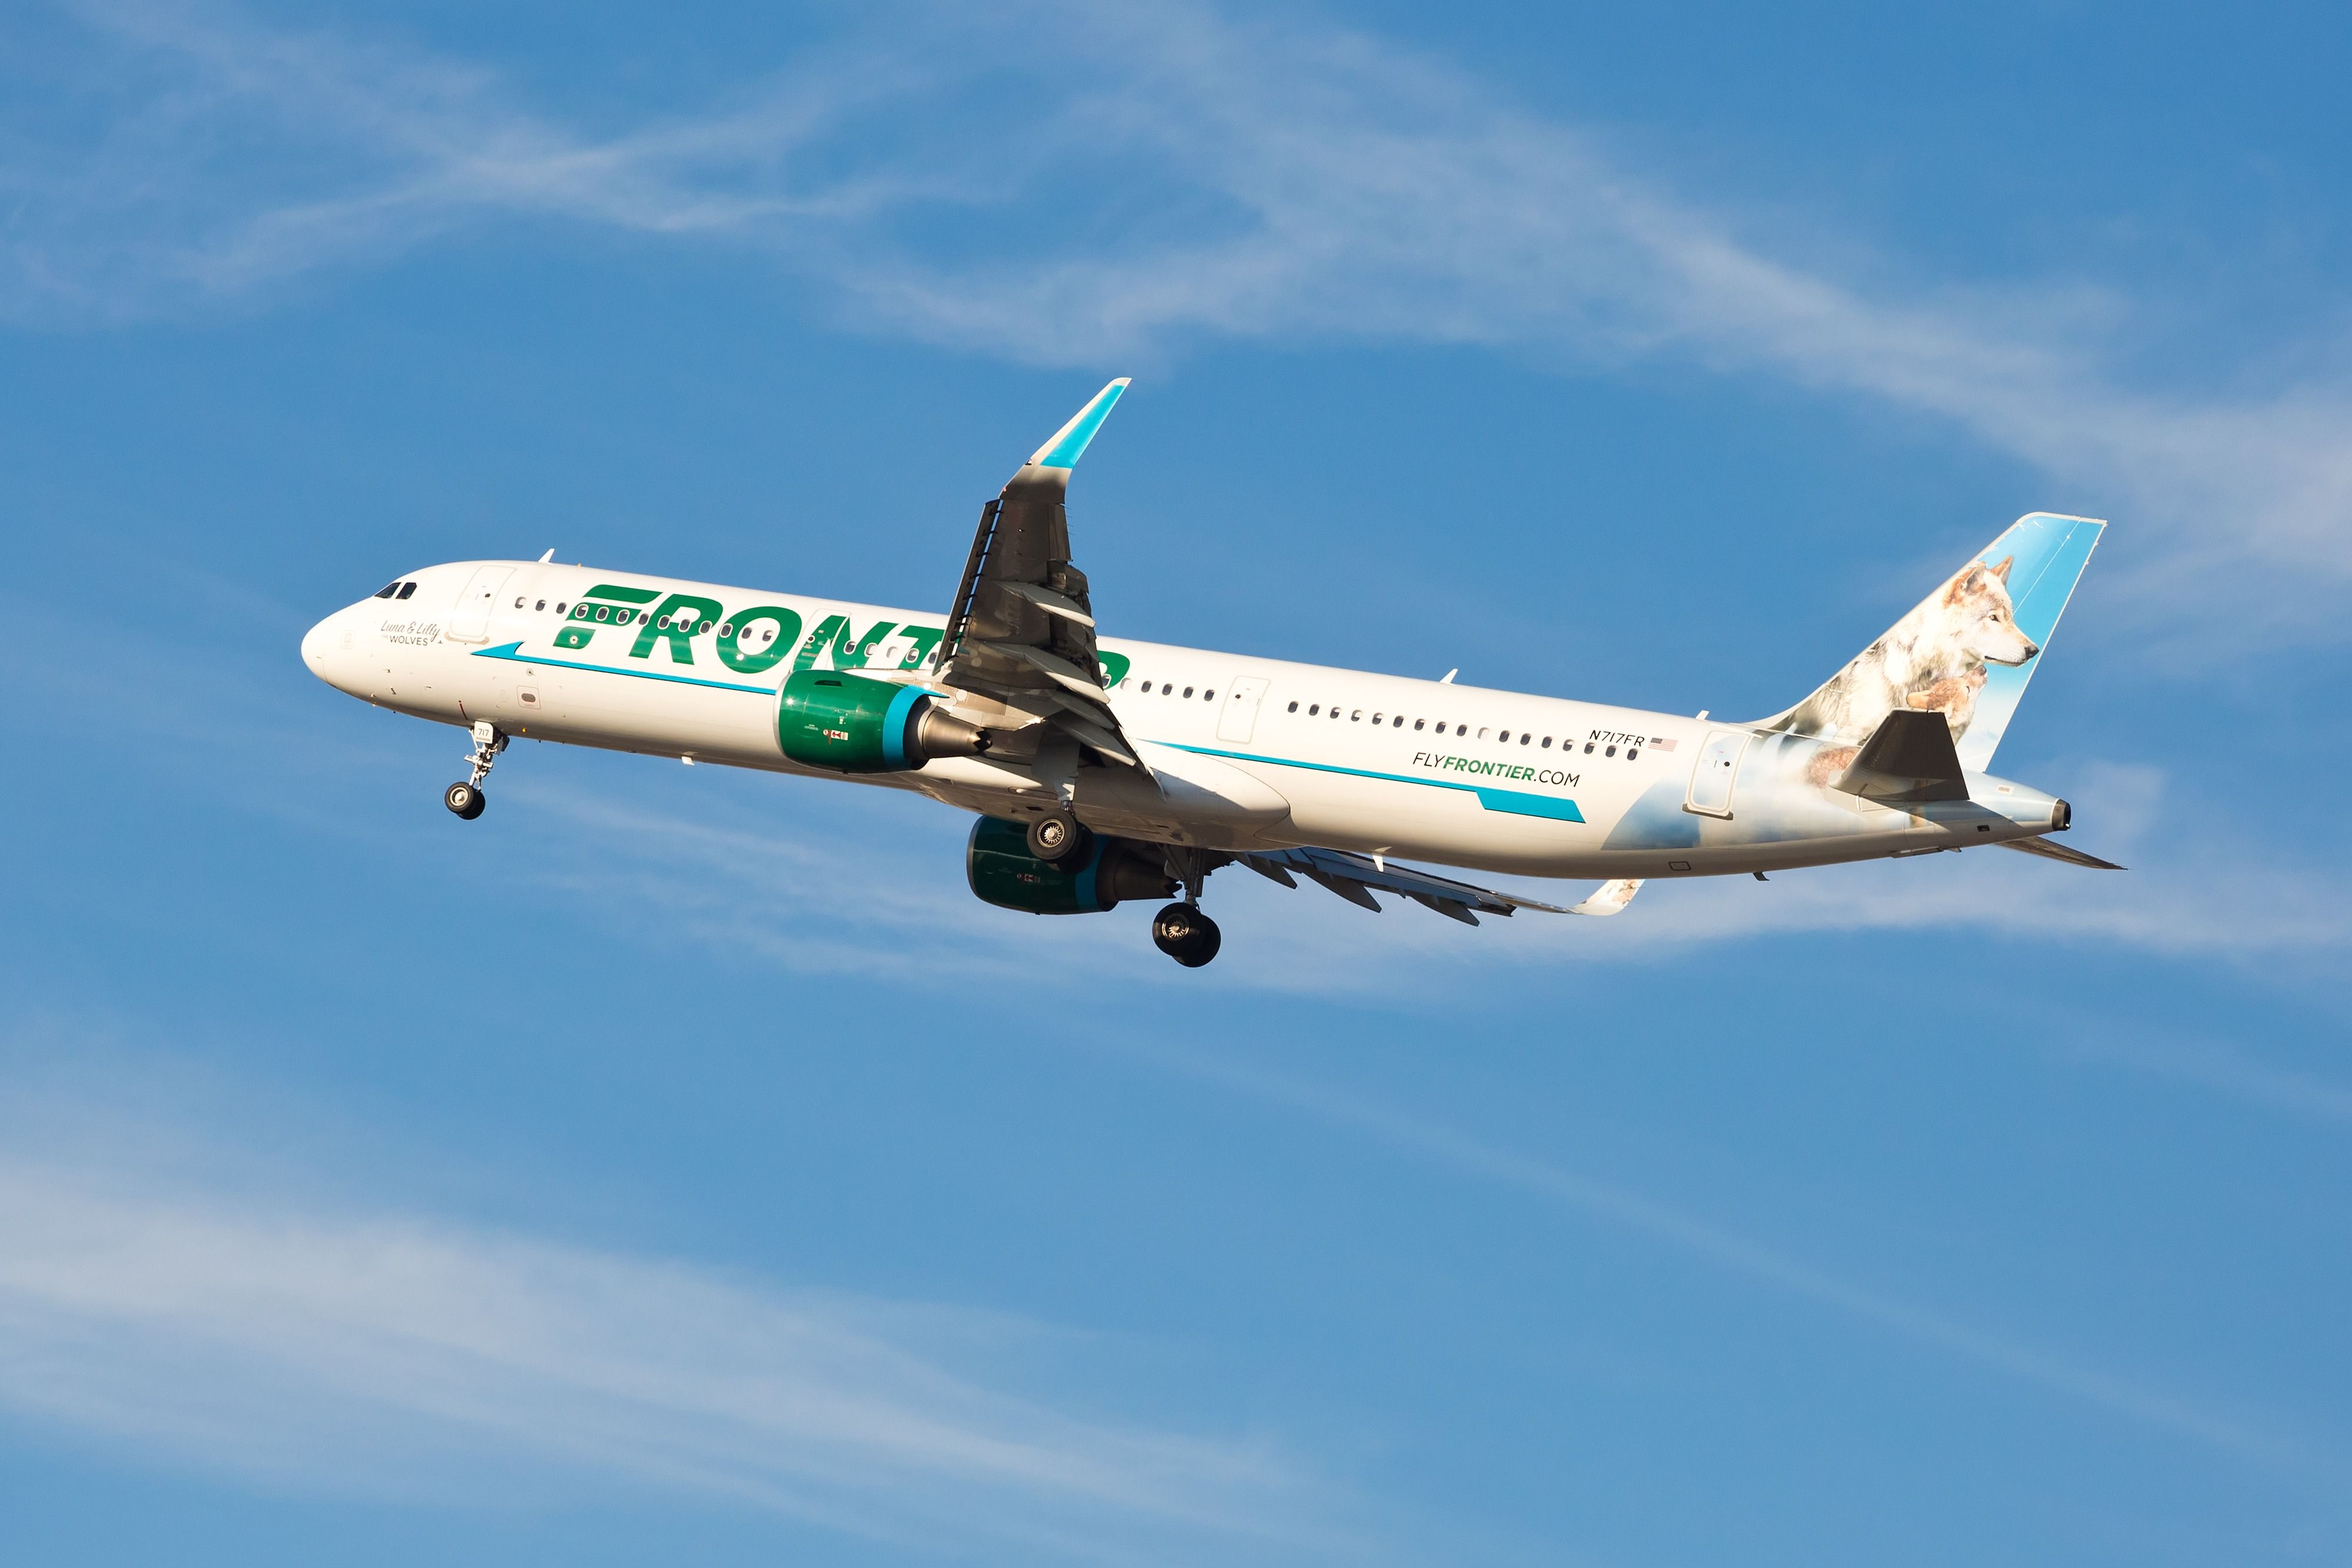 A Frontier Airlines Airbus A321 taking off